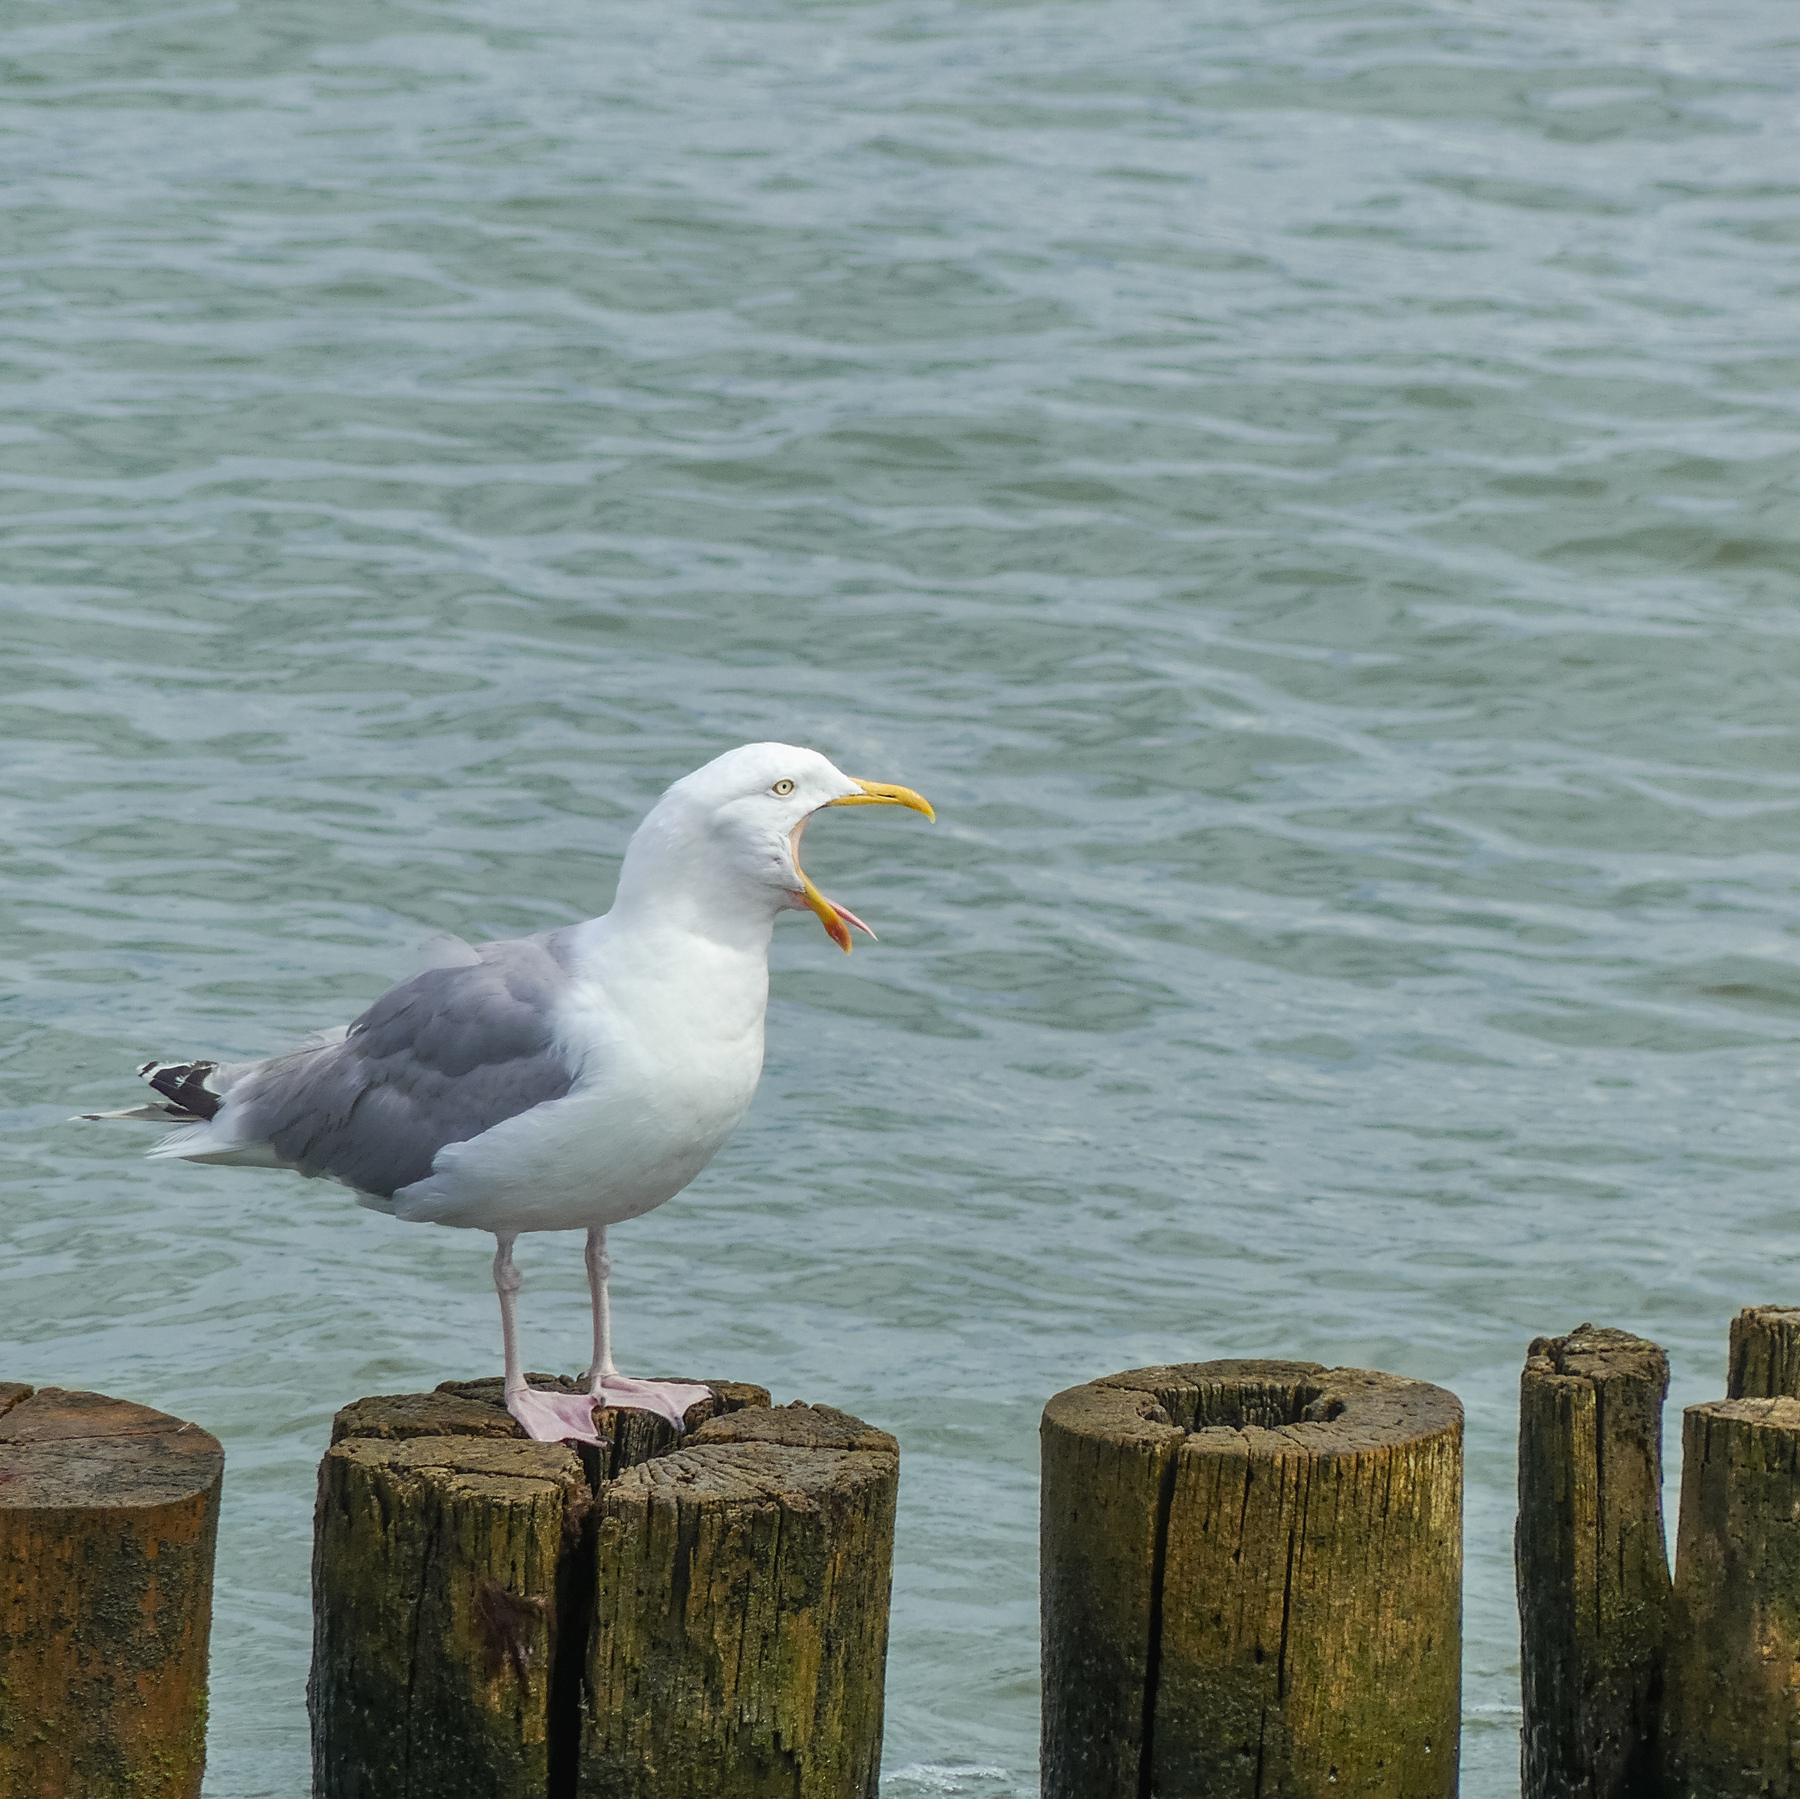 A yawning seagull on a pole in the sea